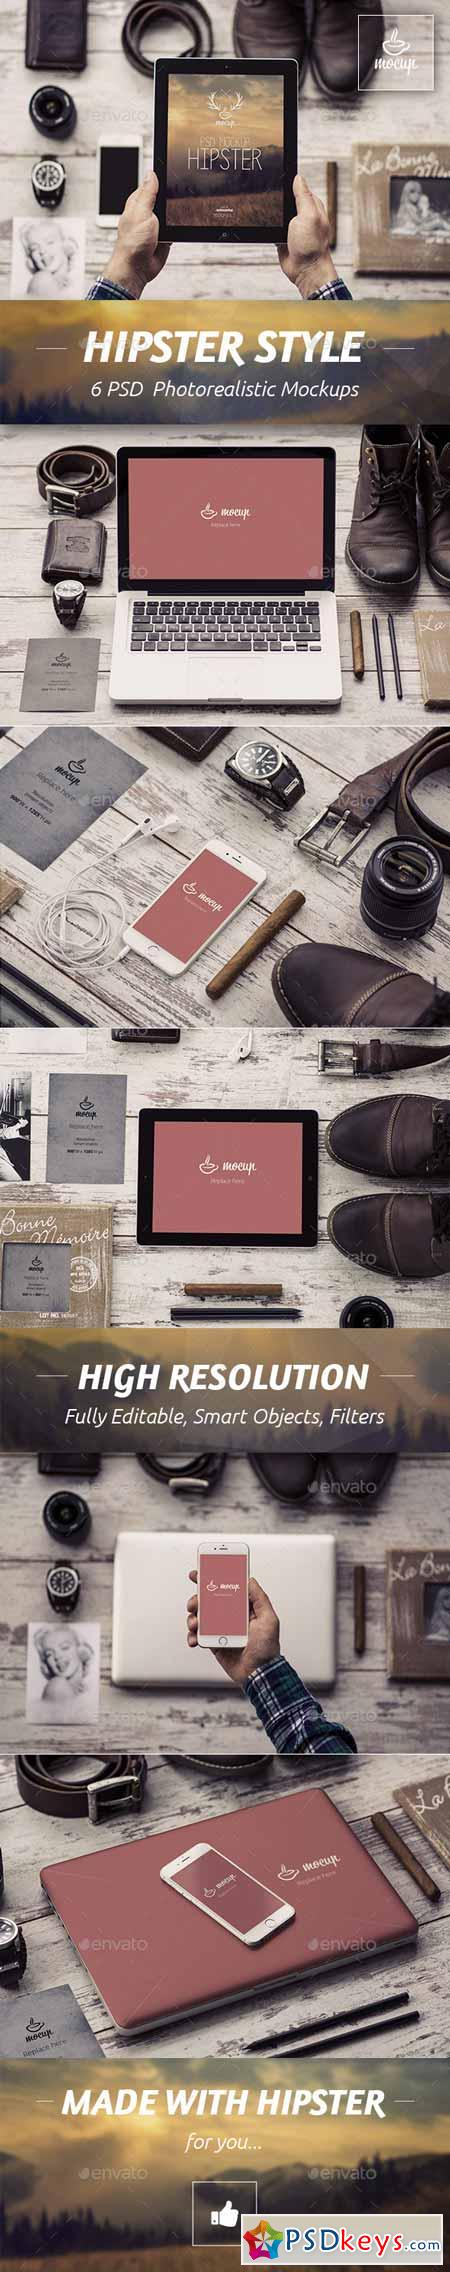 6 PSD Mockups Hipster Style 11499200